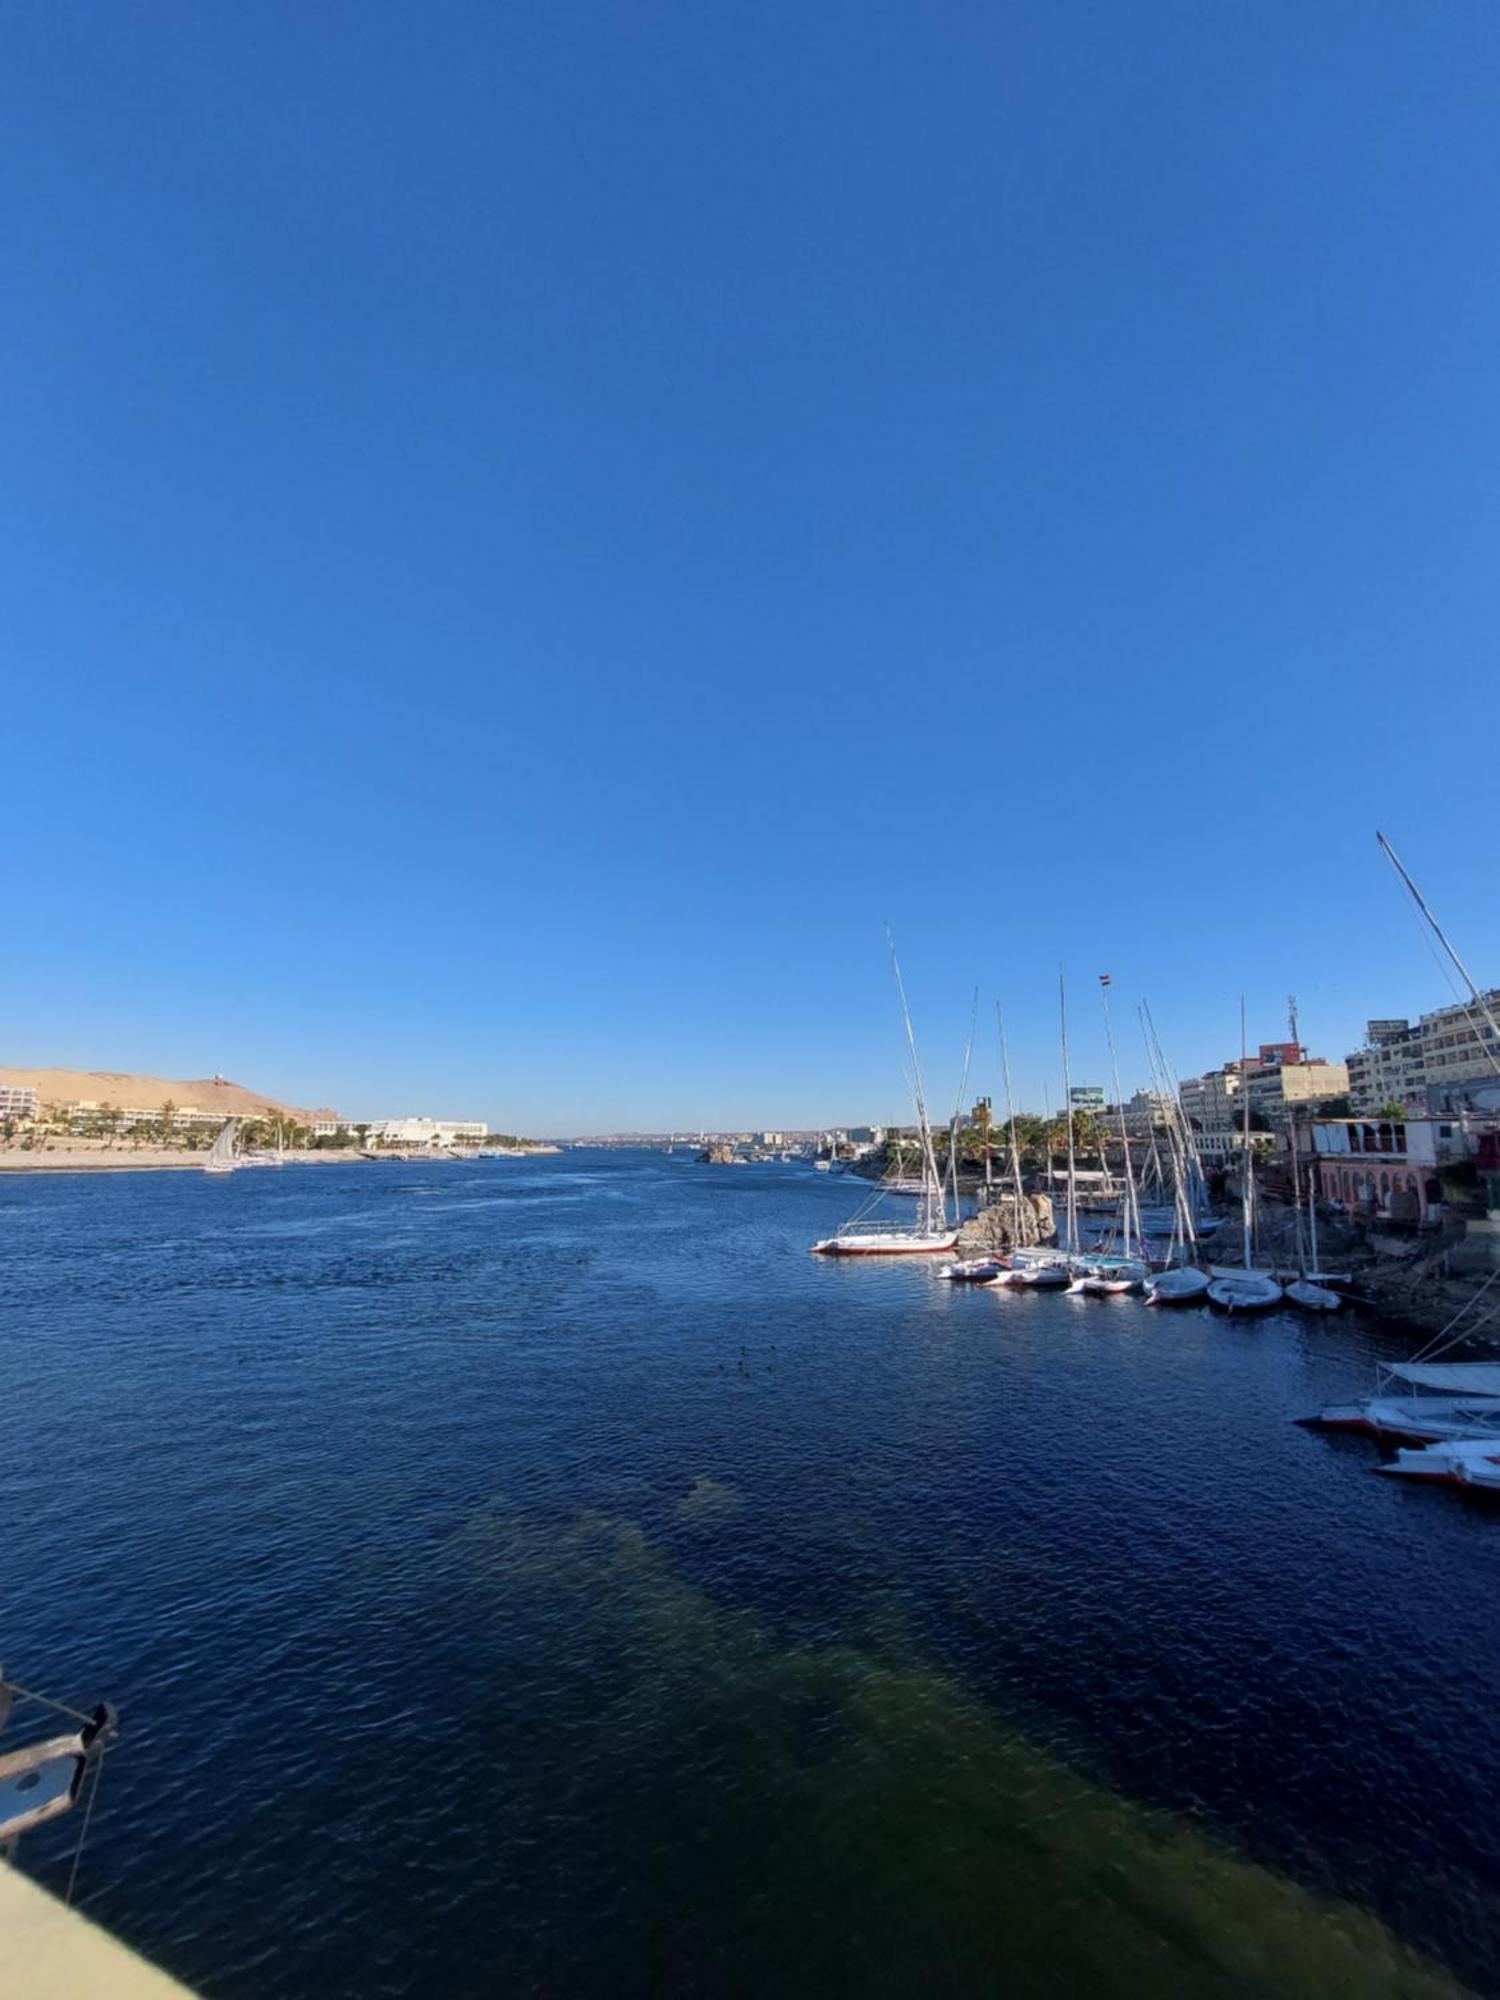 Upper Sky Tours 5 Stars Nile Cruises Sailing From Luxor To Aswan Every Saturday & Monday For 4 Nights - From Aswan Every Wednesday And Friday For Only 3 Nights With All Visits Exterior photo